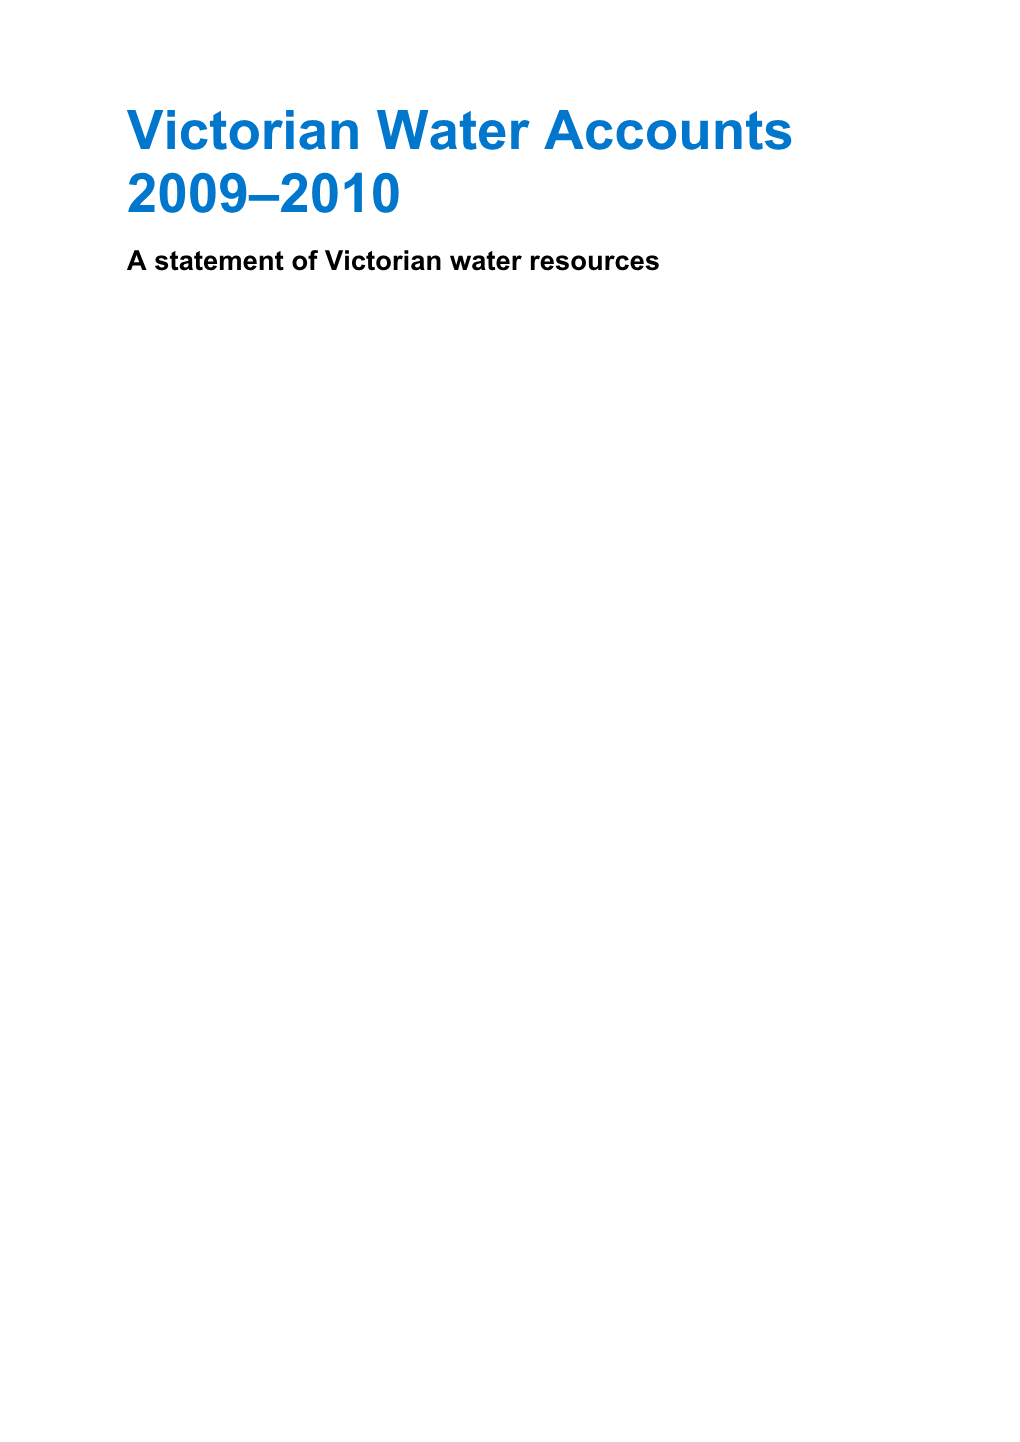 Victorian Water Accounts 2009–2010 a Statement of Victorian Water Resources